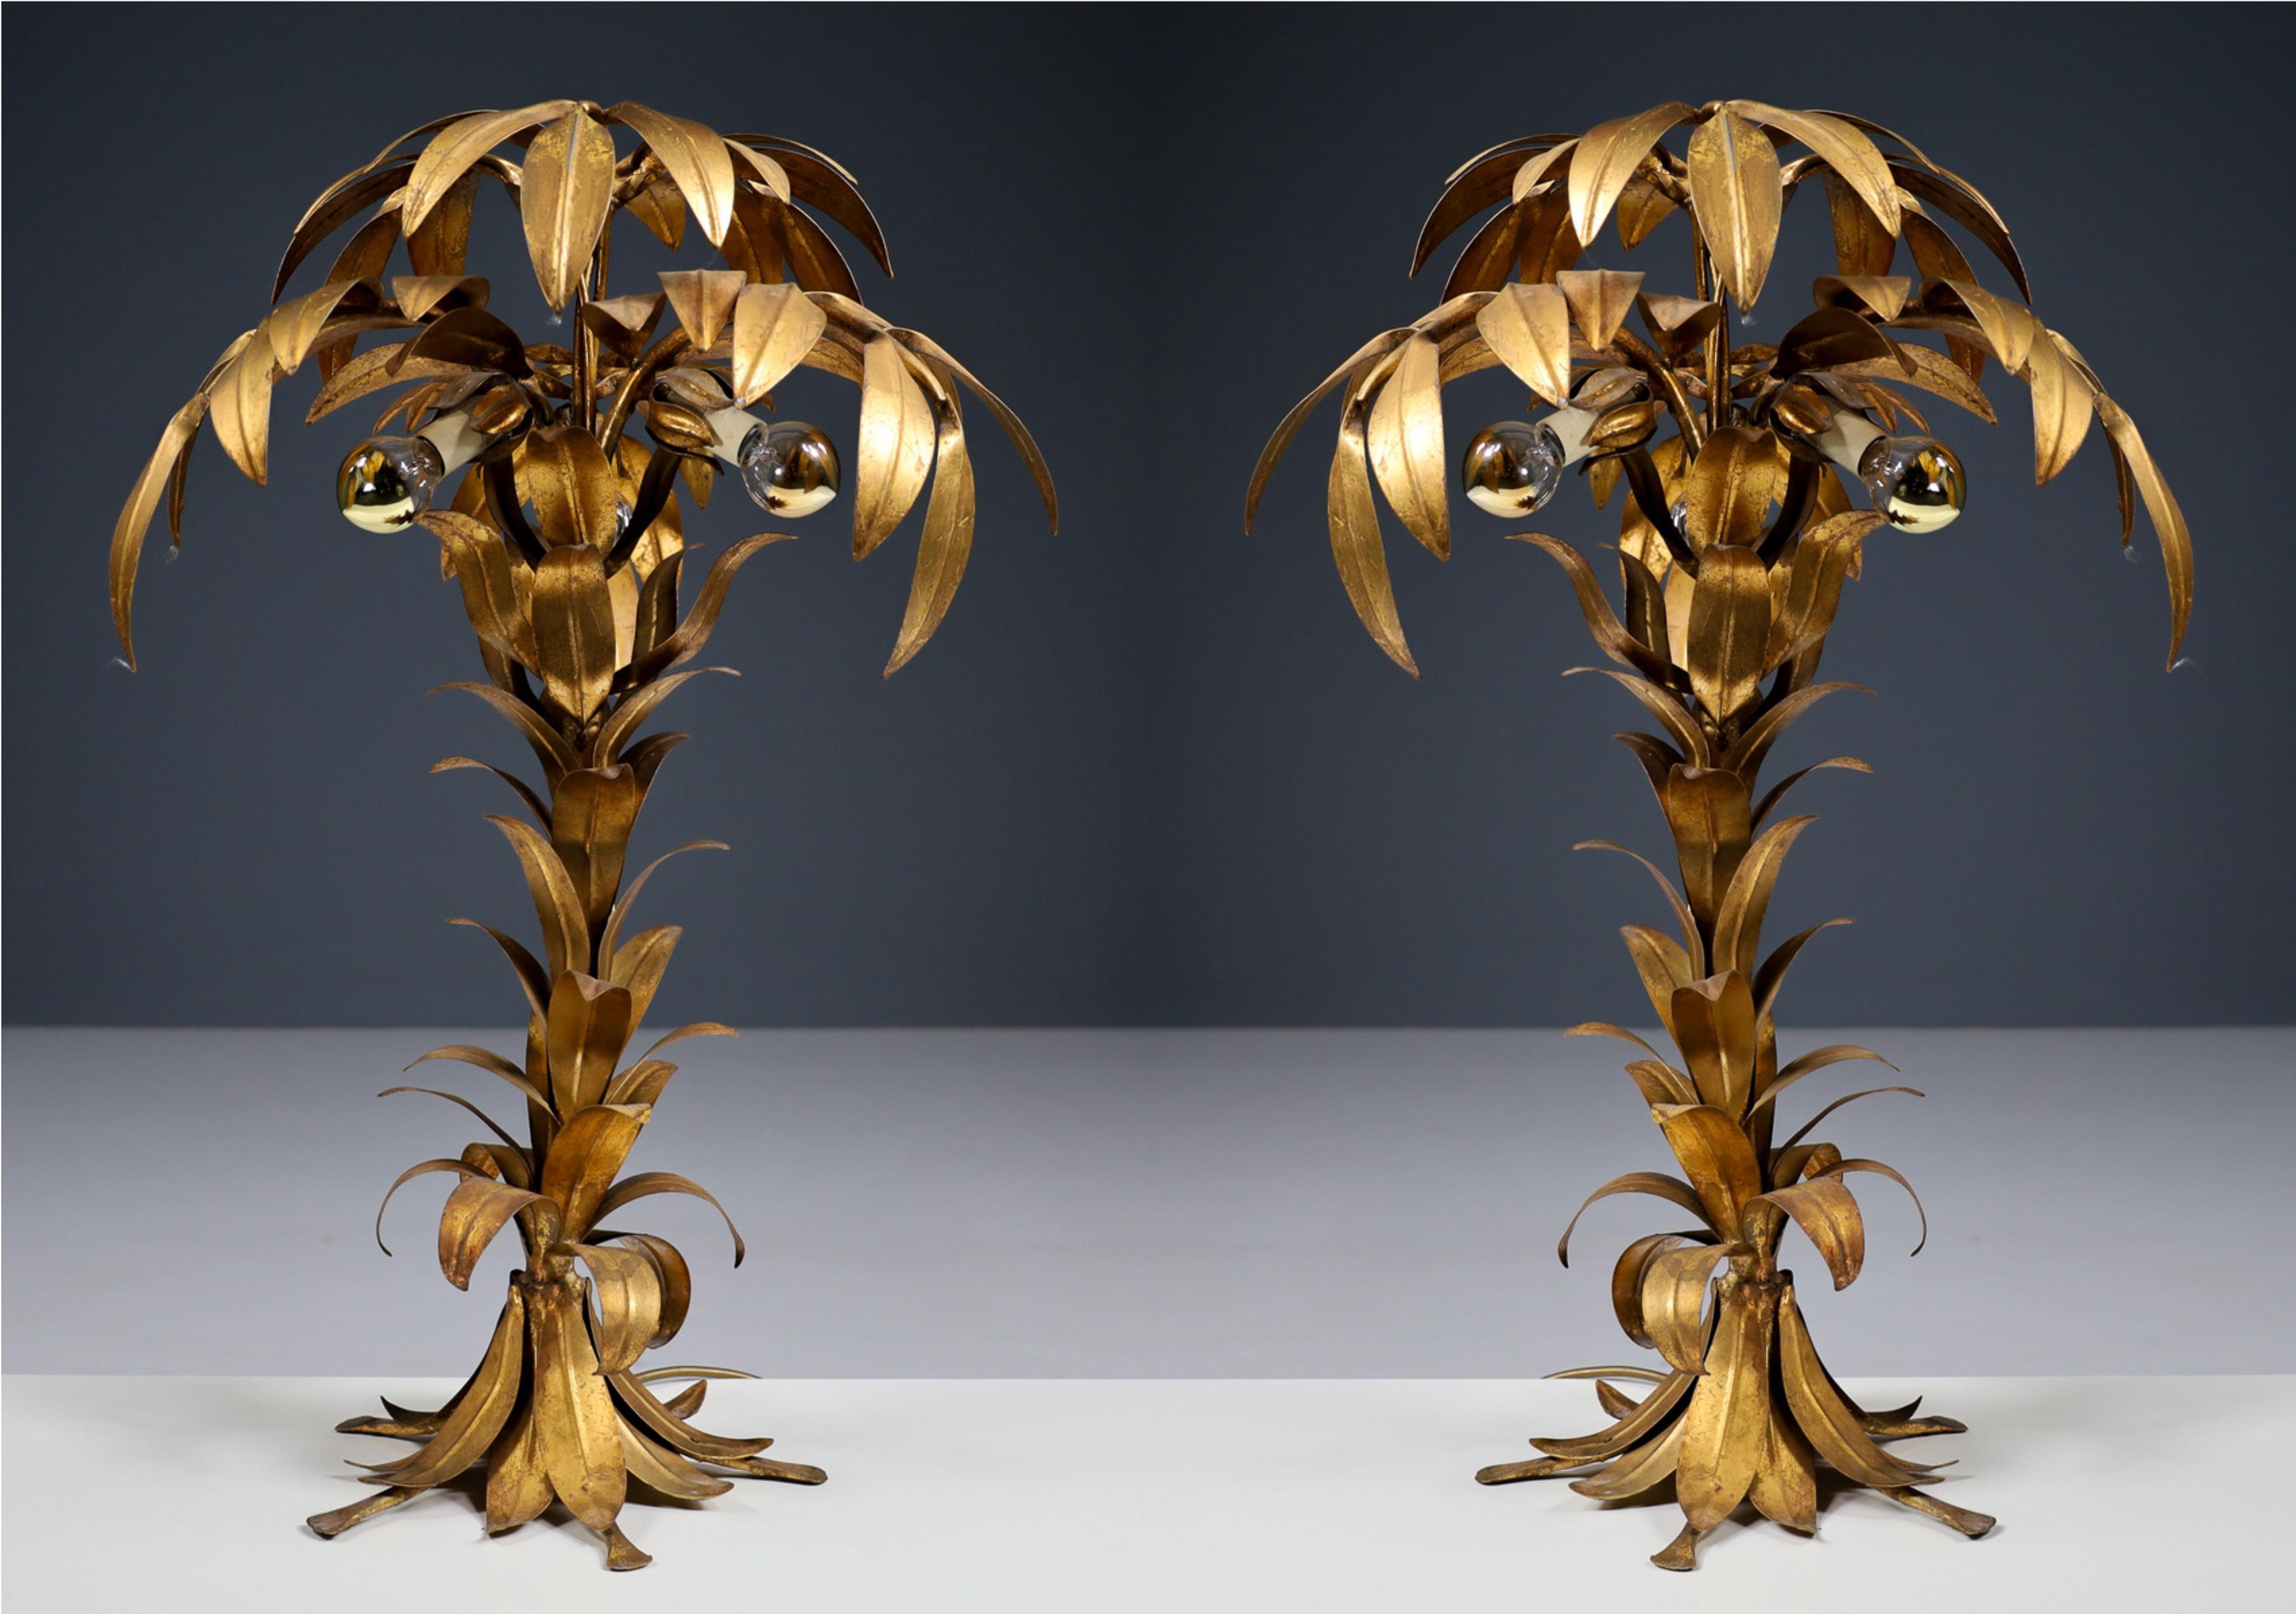 Hand-Crafted Pair of two Gilt Palm Tree Tables Lamp by Hans Kögl, Germay 1970s For Sale